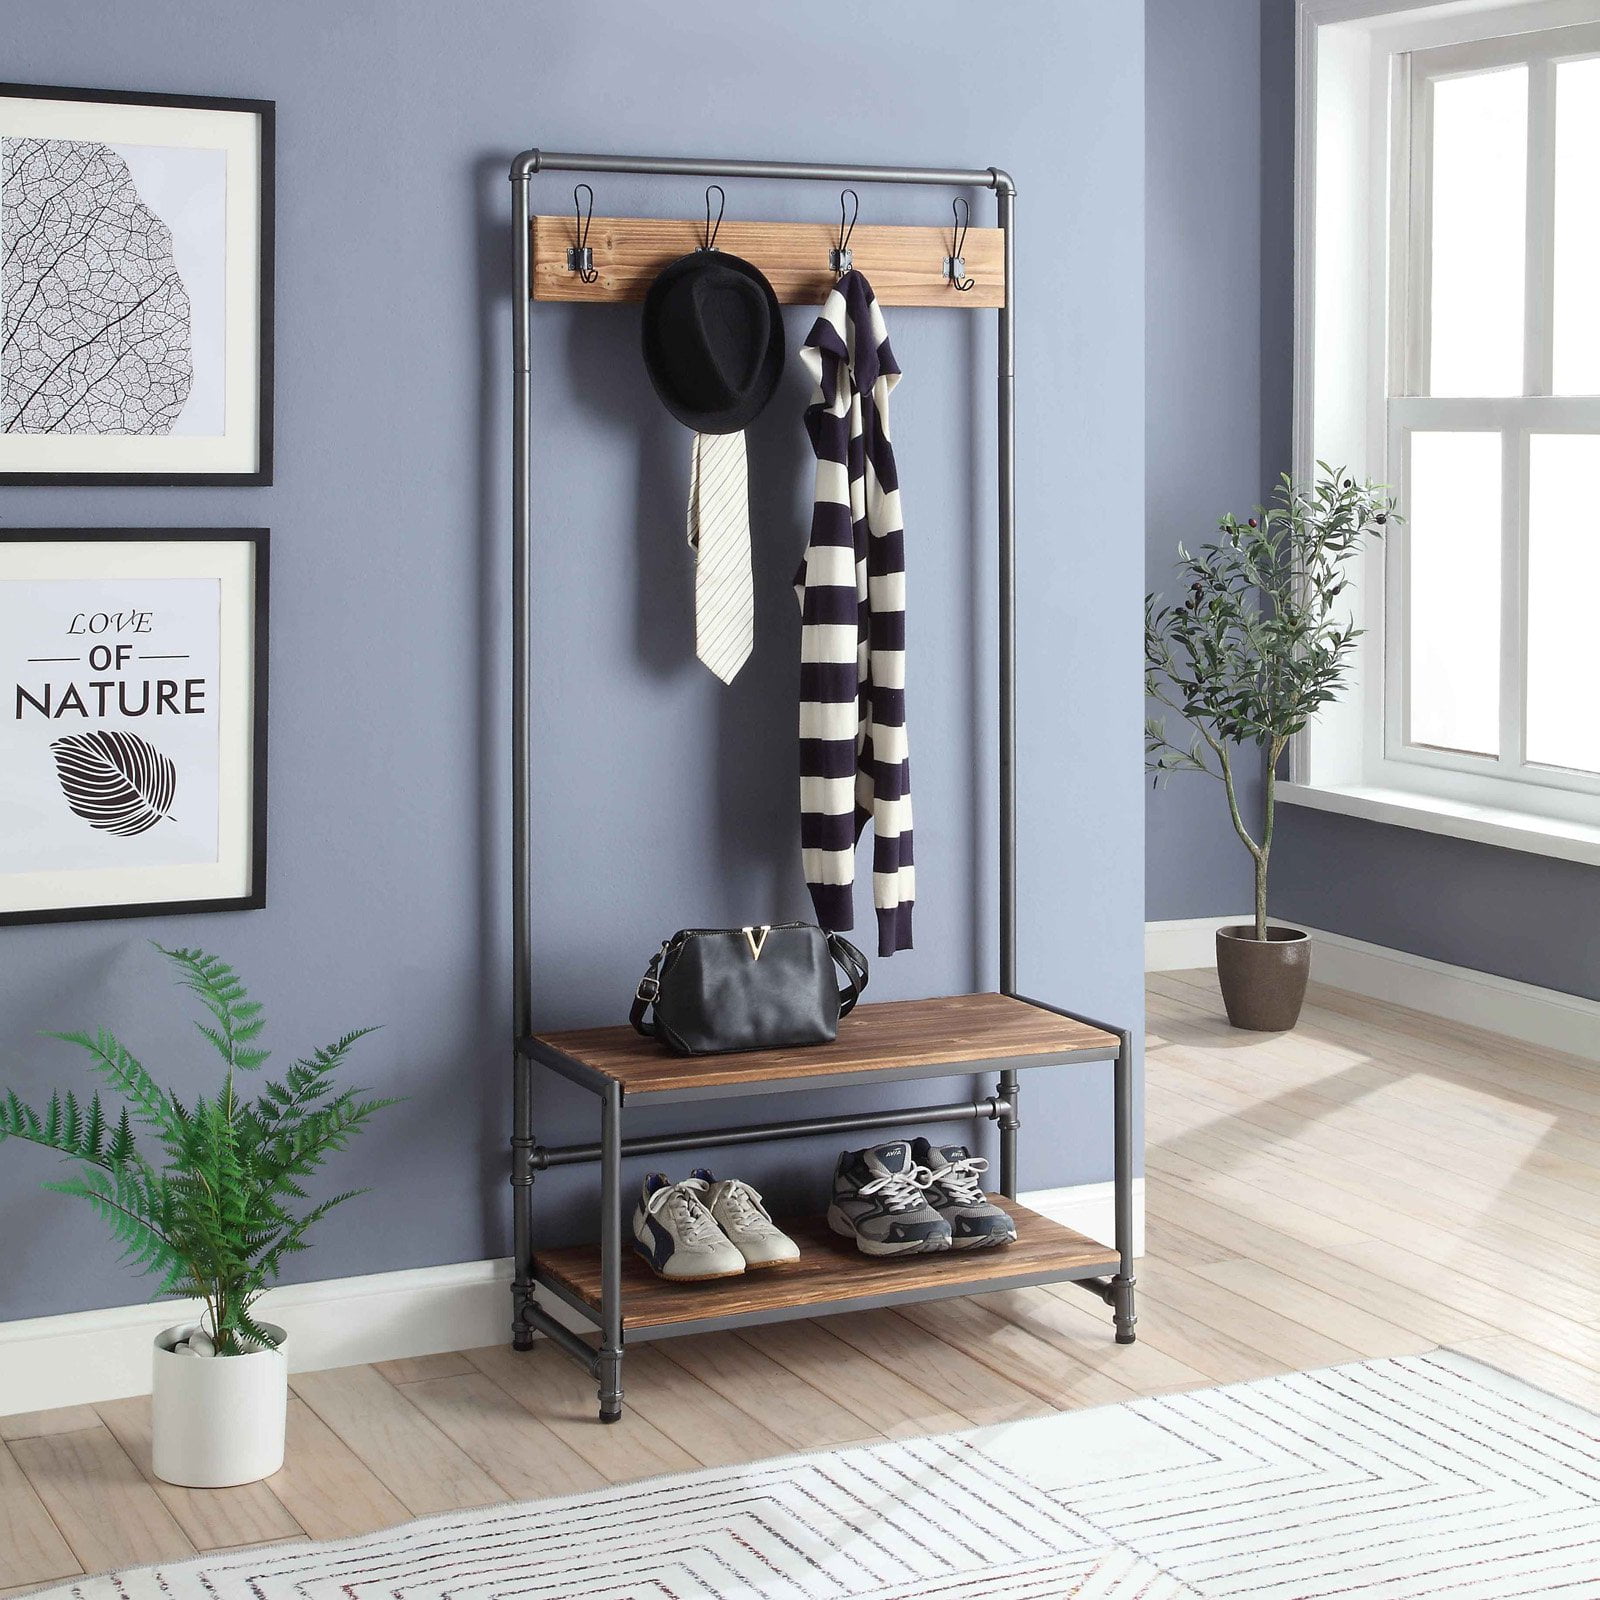 Picture of 4D Concepts 621123 Anacortes Hall Tree - Black Pipe with Brown Shelves